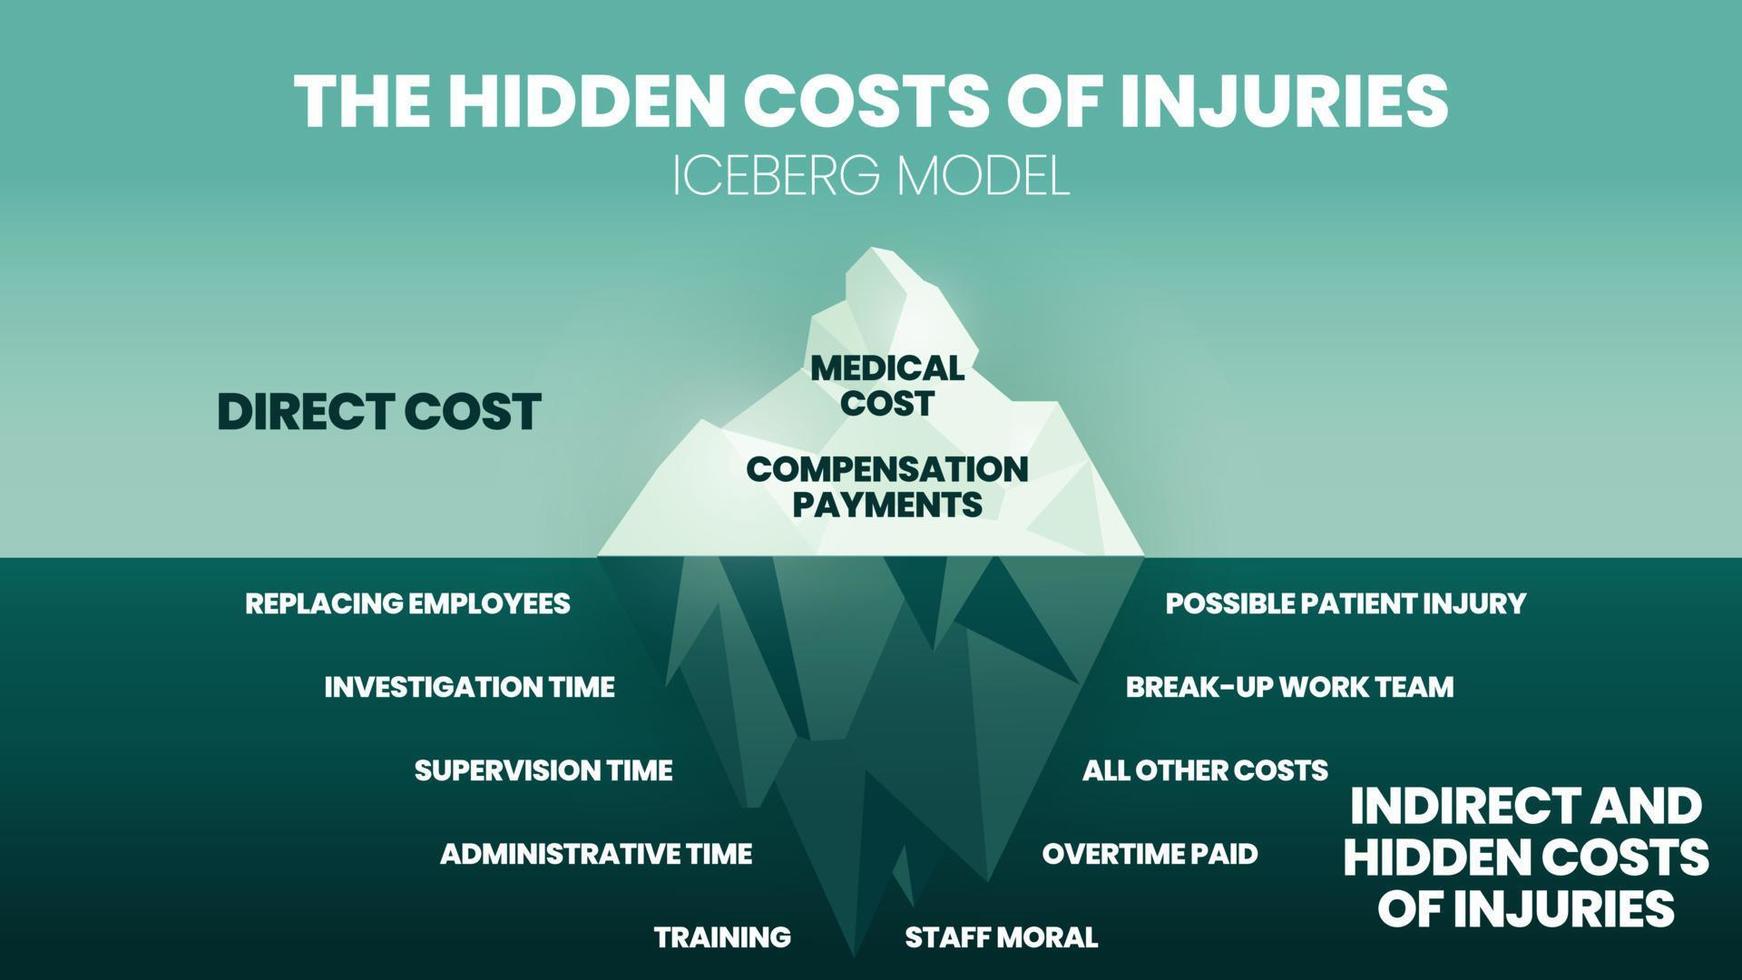 The iceberg model vector and illustration in the Hidden costs of injuries have medical and compensation on the surface. The underwater has indirect costs such as time, team, training, and morale.